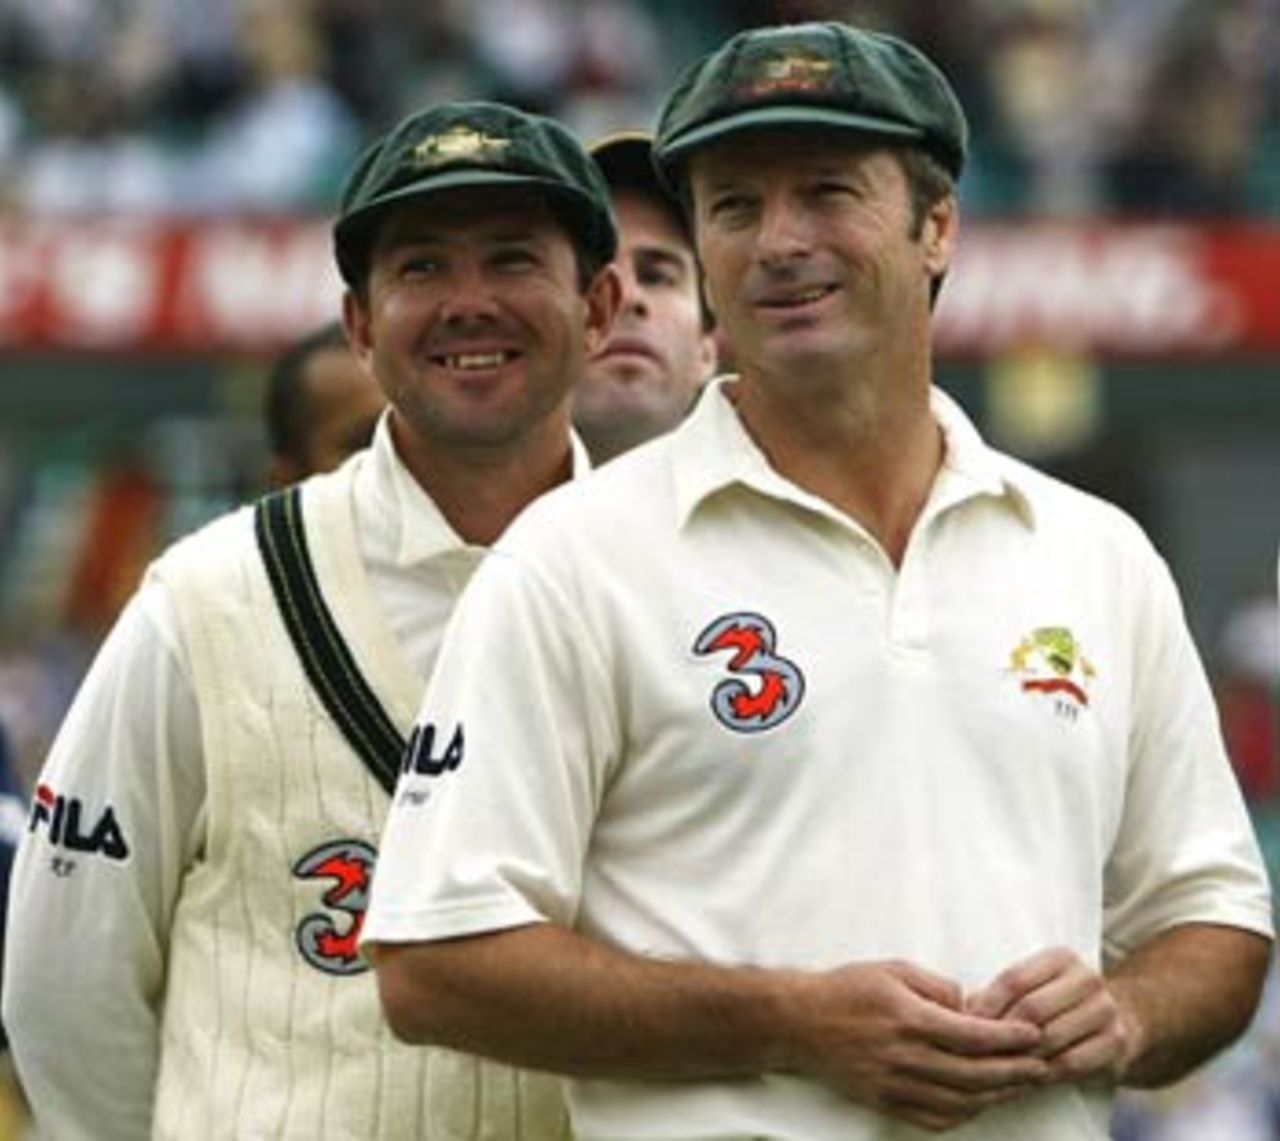 There were smiles of relief for the former and current captain of Australia as the match was drawn, Australia v India, 4th Test, Sydney, 5th day, January 6, 2004